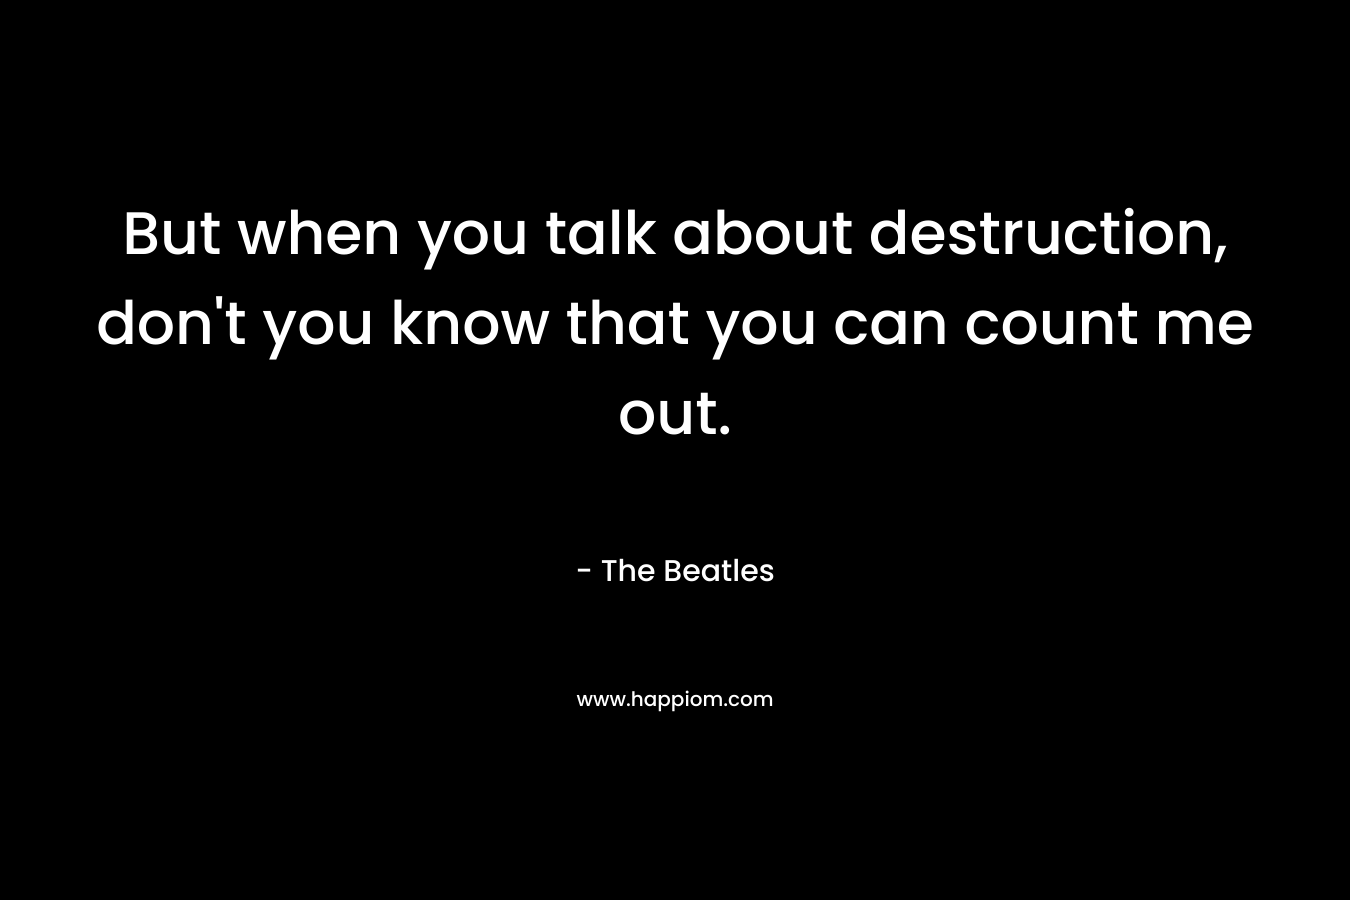 But when you talk about destruction, don’t you know that you can count me out. – The Beatles